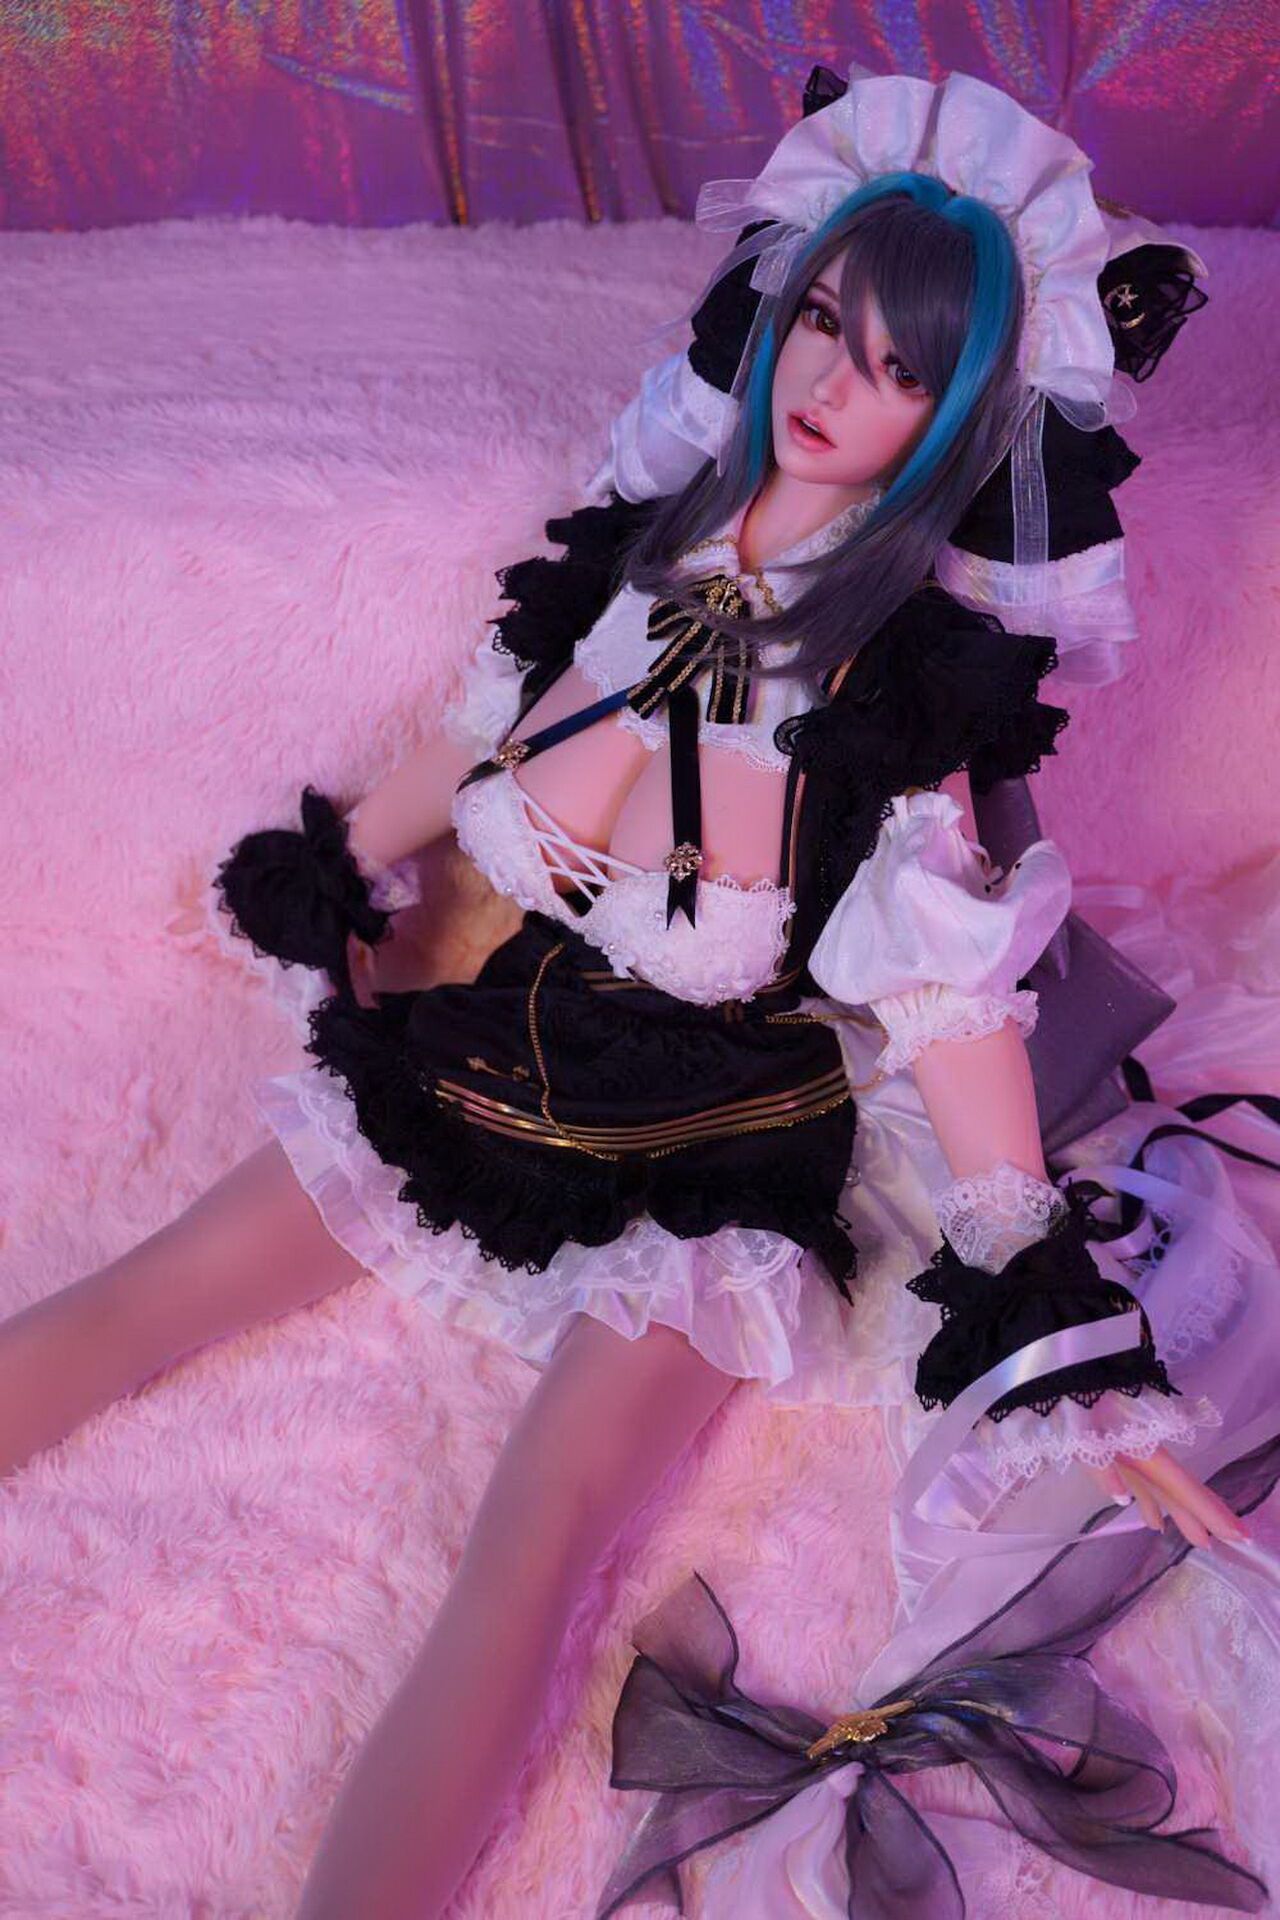 Meow meow meow, your personal maid Cheshire Meow Cosplay is here !! by Little pickled cucumber @devil_sama8844 29